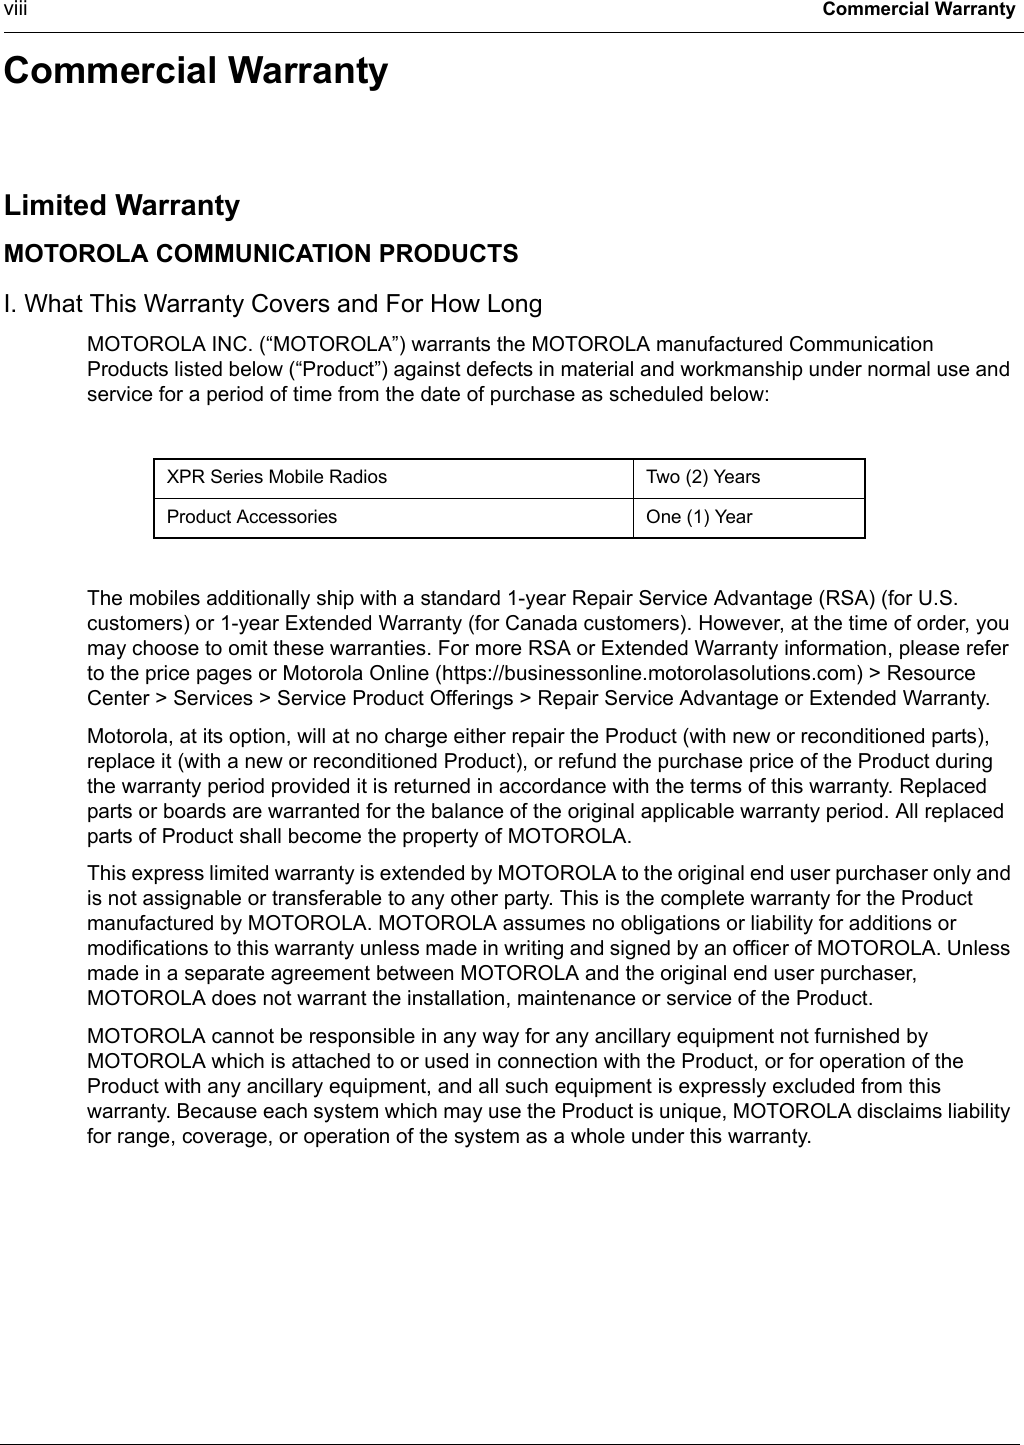 viii Commercial WarrantyCommercial WarrantyLimited WarrantyMOTOROLA COMMUNICATION PRODUCTSI. What This Warranty Covers and For How LongMOTOROLA INC. (“MOTOROLA”) warrants the MOTOROLA manufactured Communication Products listed below (“Product”) against defects in material and workmanship under normal use and service for a period of time from the date of purchase as scheduled below:The mobiles additionally ship with a standard 1-year Repair Service Advantage (RSA) (for U.S. customers) or 1-year Extended Warranty (for Canada customers). However, at the time of order, you may choose to omit these warranties. For more RSA or Extended Warranty information, please refer to the price pages or Motorola Online (https://businessonline.motorolasolutions.com) &gt; Resource Center &gt; Services &gt; Service Product Offerings &gt; Repair Service Advantage or Extended Warranty.Motorola, at its option, will at no charge either repair the Product (with new or reconditioned parts), replace it (with a new or reconditioned Product), or refund the purchase price of the Product during the warranty period provided it is returned in accordance with the terms of this warranty. Replaced parts or boards are warranted for the balance of the original applicable warranty period. All replaced parts of Product shall become the property of MOTOROLA.This express limited warranty is extended by MOTOROLA to the original end user purchaser only and is not assignable or transferable to any other party. This is the complete warranty for the Product manufactured by MOTOROLA. MOTOROLA assumes no obligations or liability for additions or modifications to this warranty unless made in writing and signed by an officer of MOTOROLA. Unless made in a separate agreement between MOTOROLA and the original end user purchaser, MOTOROLA does not warrant the installation, maintenance or service of the Product.MOTOROLA cannot be responsible in any way for any ancillary equipment not furnished by MOTOROLA which is attached to or used in connection with the Product, or for operation of the Product with any ancillary equipment, and all such equipment is expressly excluded from this warranty. Because each system which may use the Product is unique, MOTOROLA disclaims liability for range, coverage, or operation of the system as a whole under this warranty.XPR Series Mobile Radios Two (2) YearsProduct Accessories One (1) Year